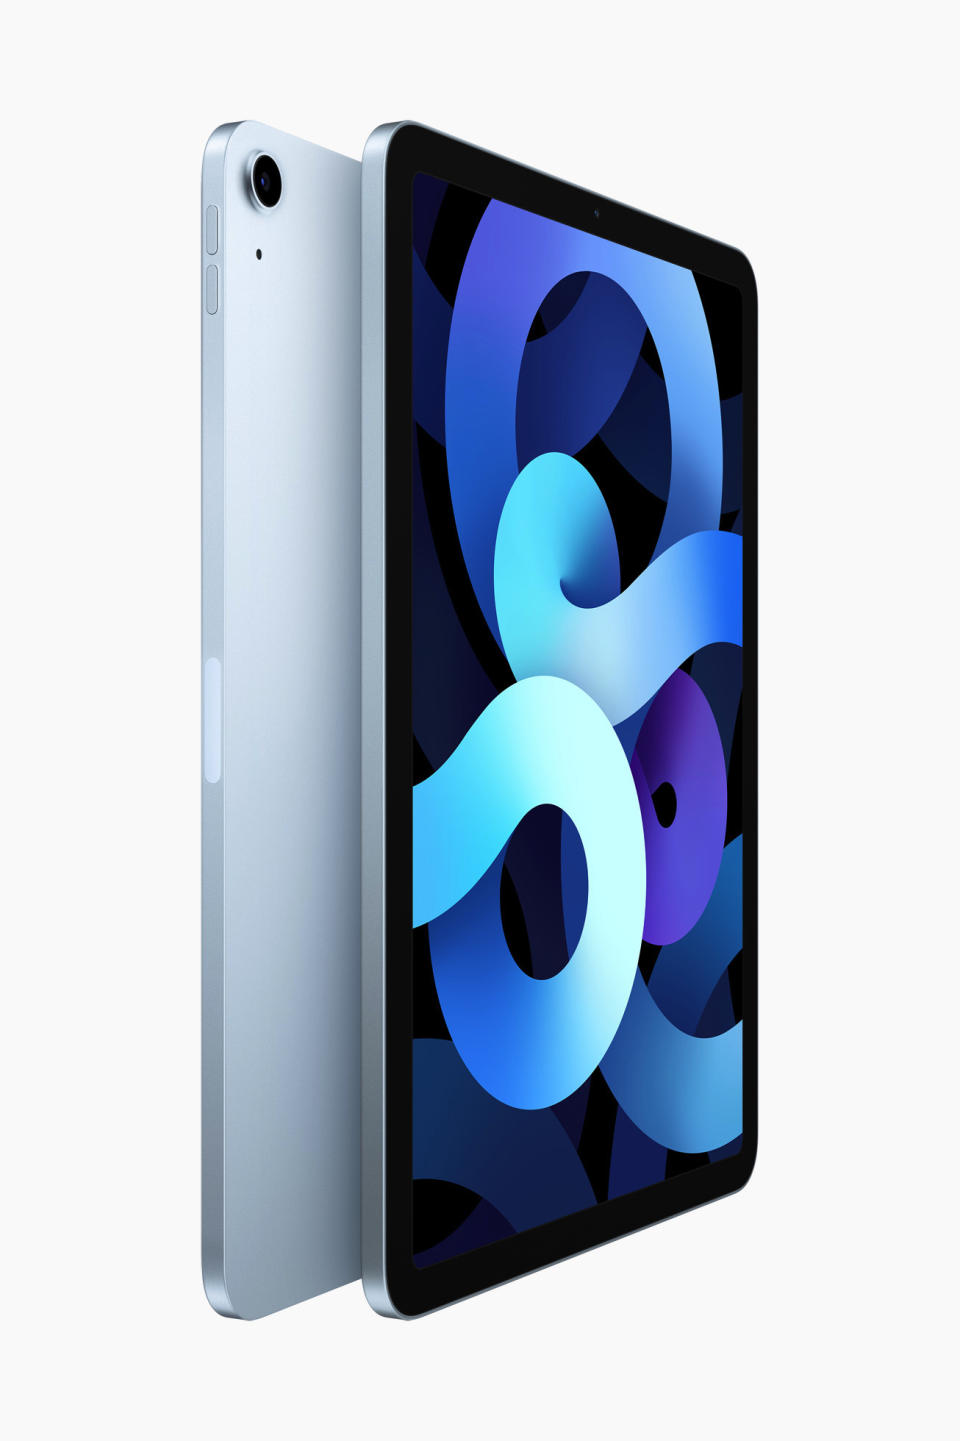 Features new all-screen design with larger 10.9-inch display, new 12MP rear camera, next-generation Touch ID sensor, and more